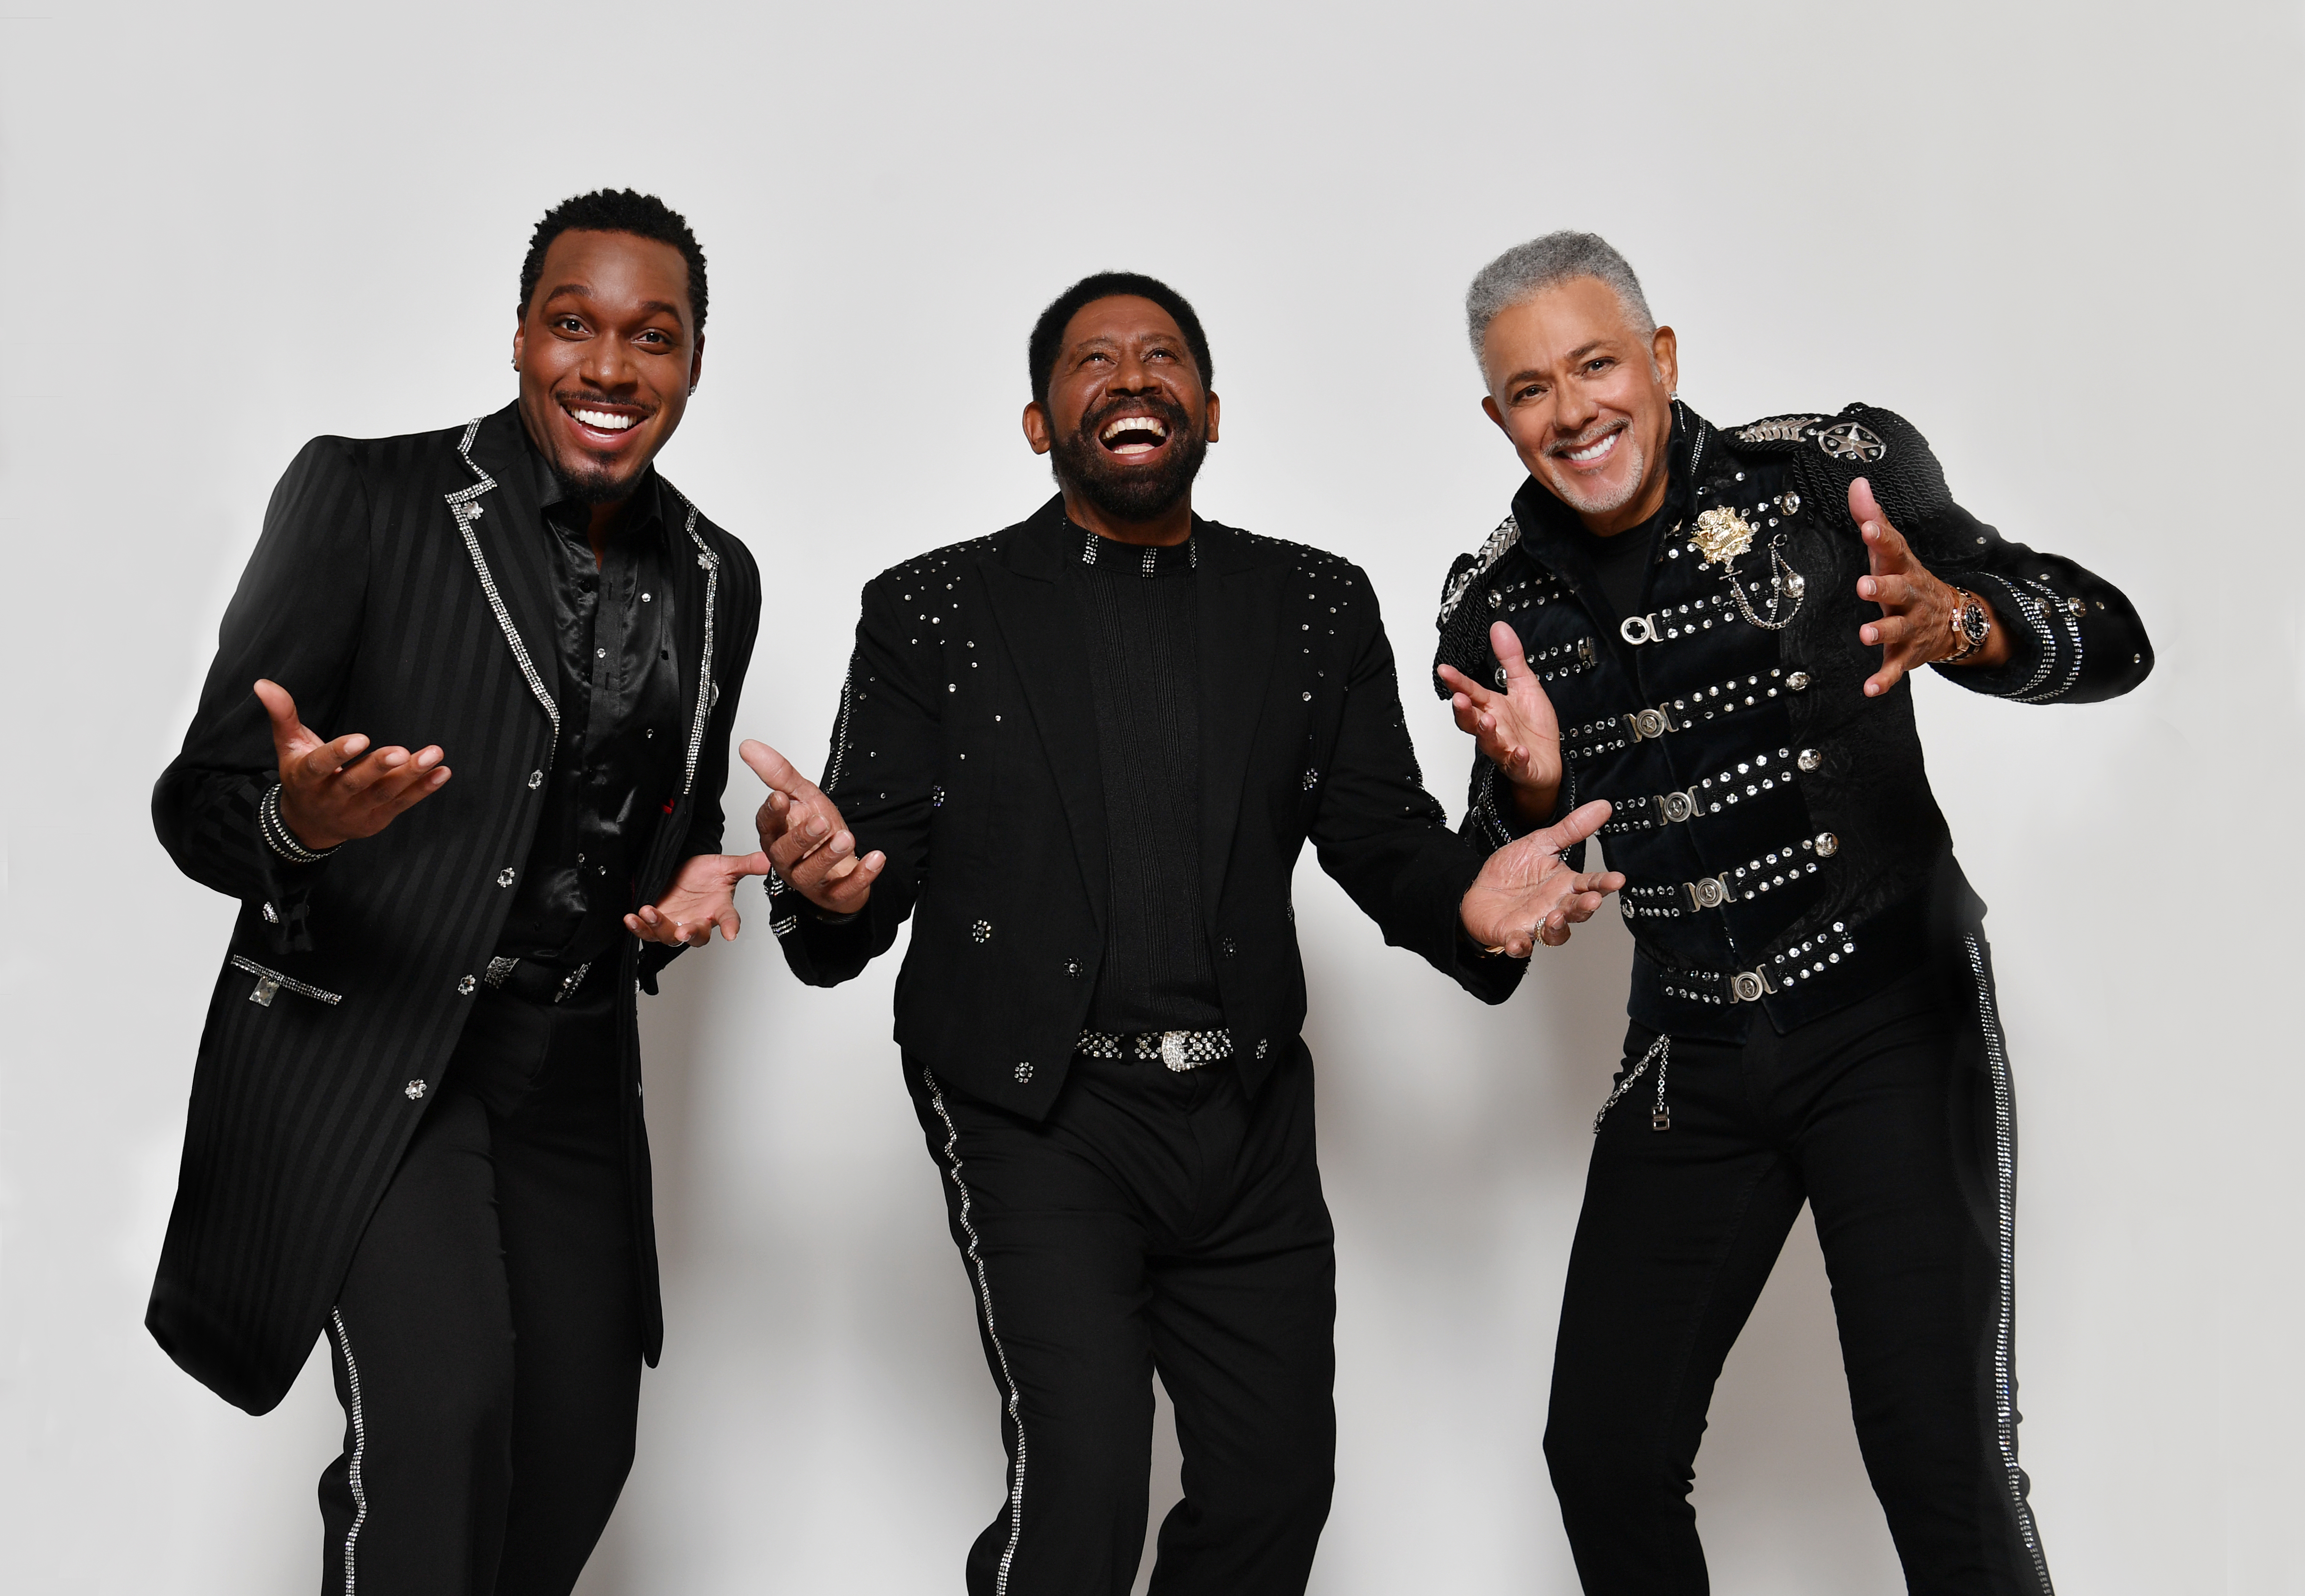 Image of the Commodores